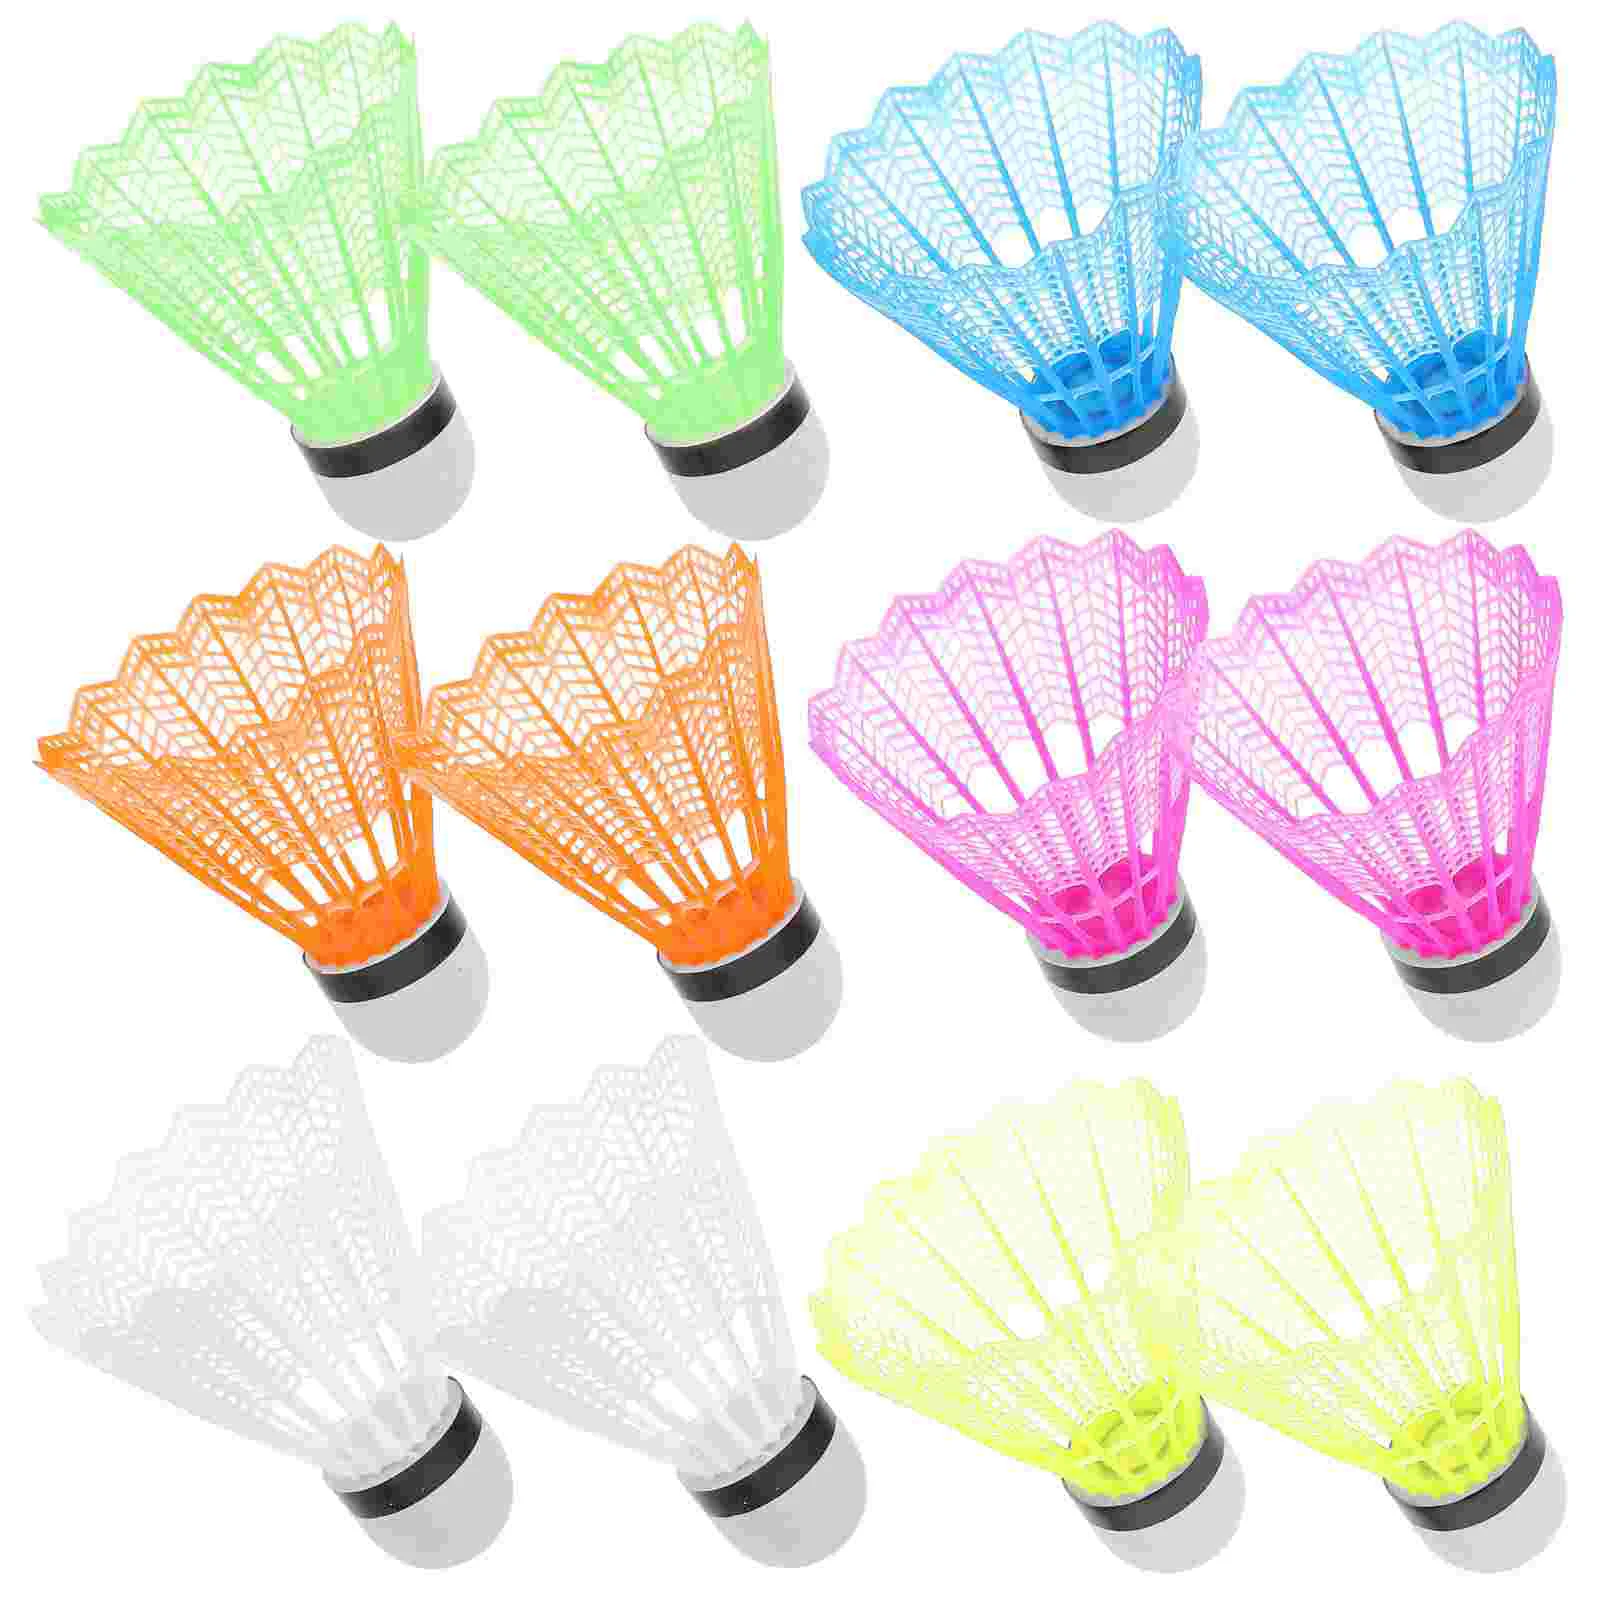 

12 Pcs Badminton Shuttlecocks Colored Accessories Outdoor Small Indoor Beginner Sports Exercising Child